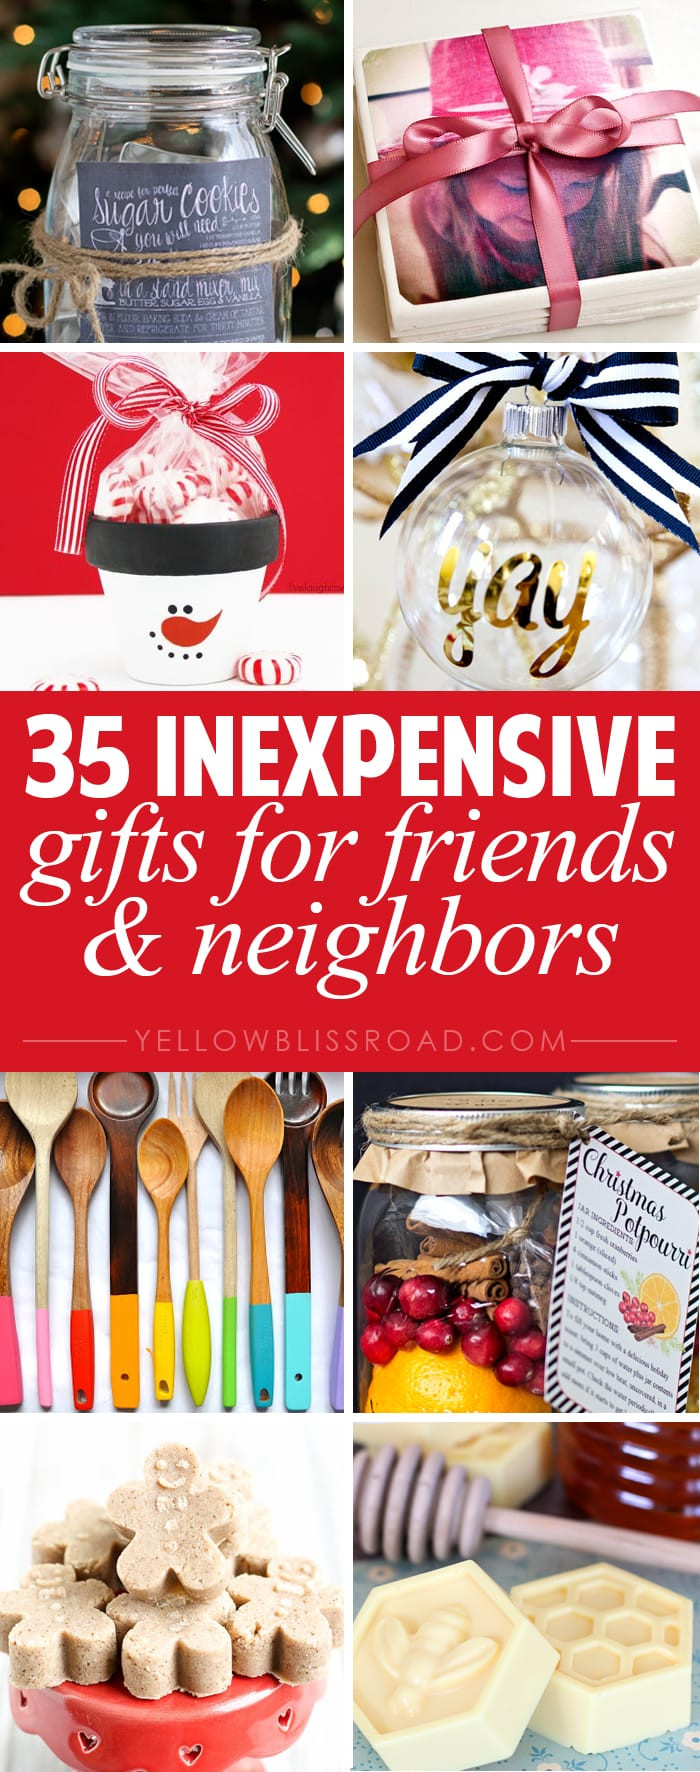 Friend Christmas Gift Ideas
 Bud Gifts Ideas for Friends and Neighbors Homemade